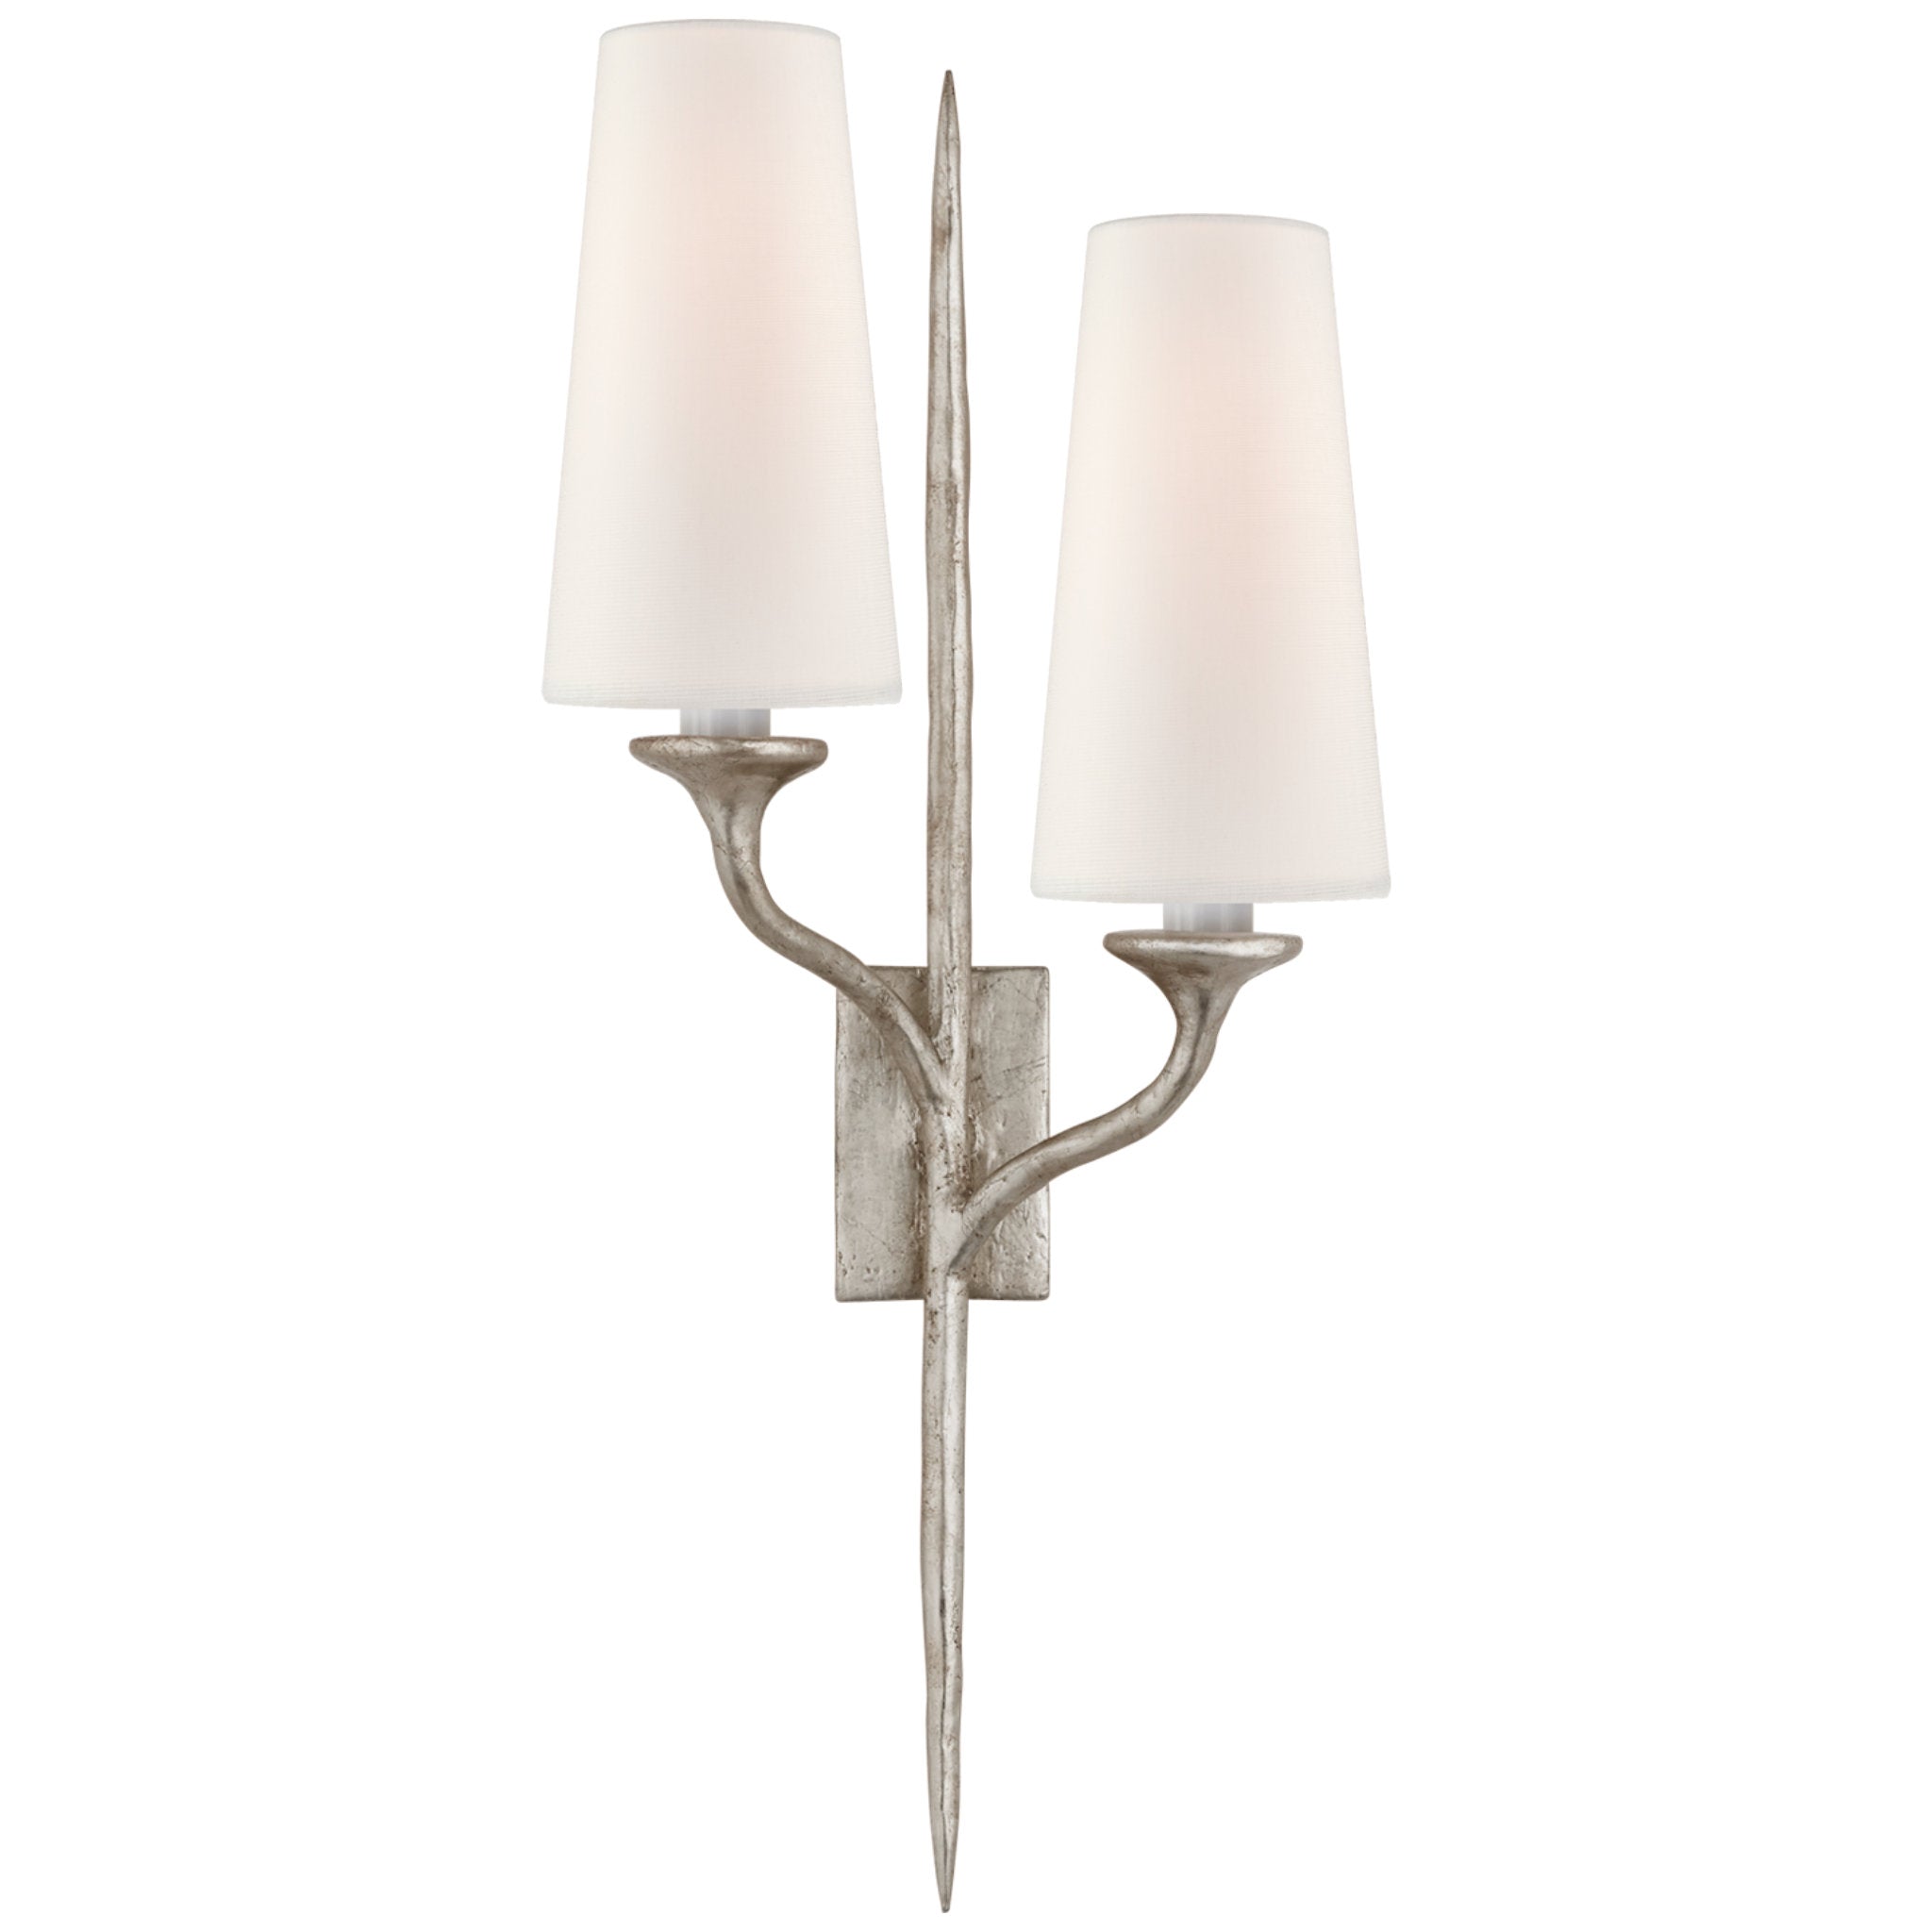 Julie Neill Iberia Double Left Sconce in Burnished Silver Leaf with Linen Shades